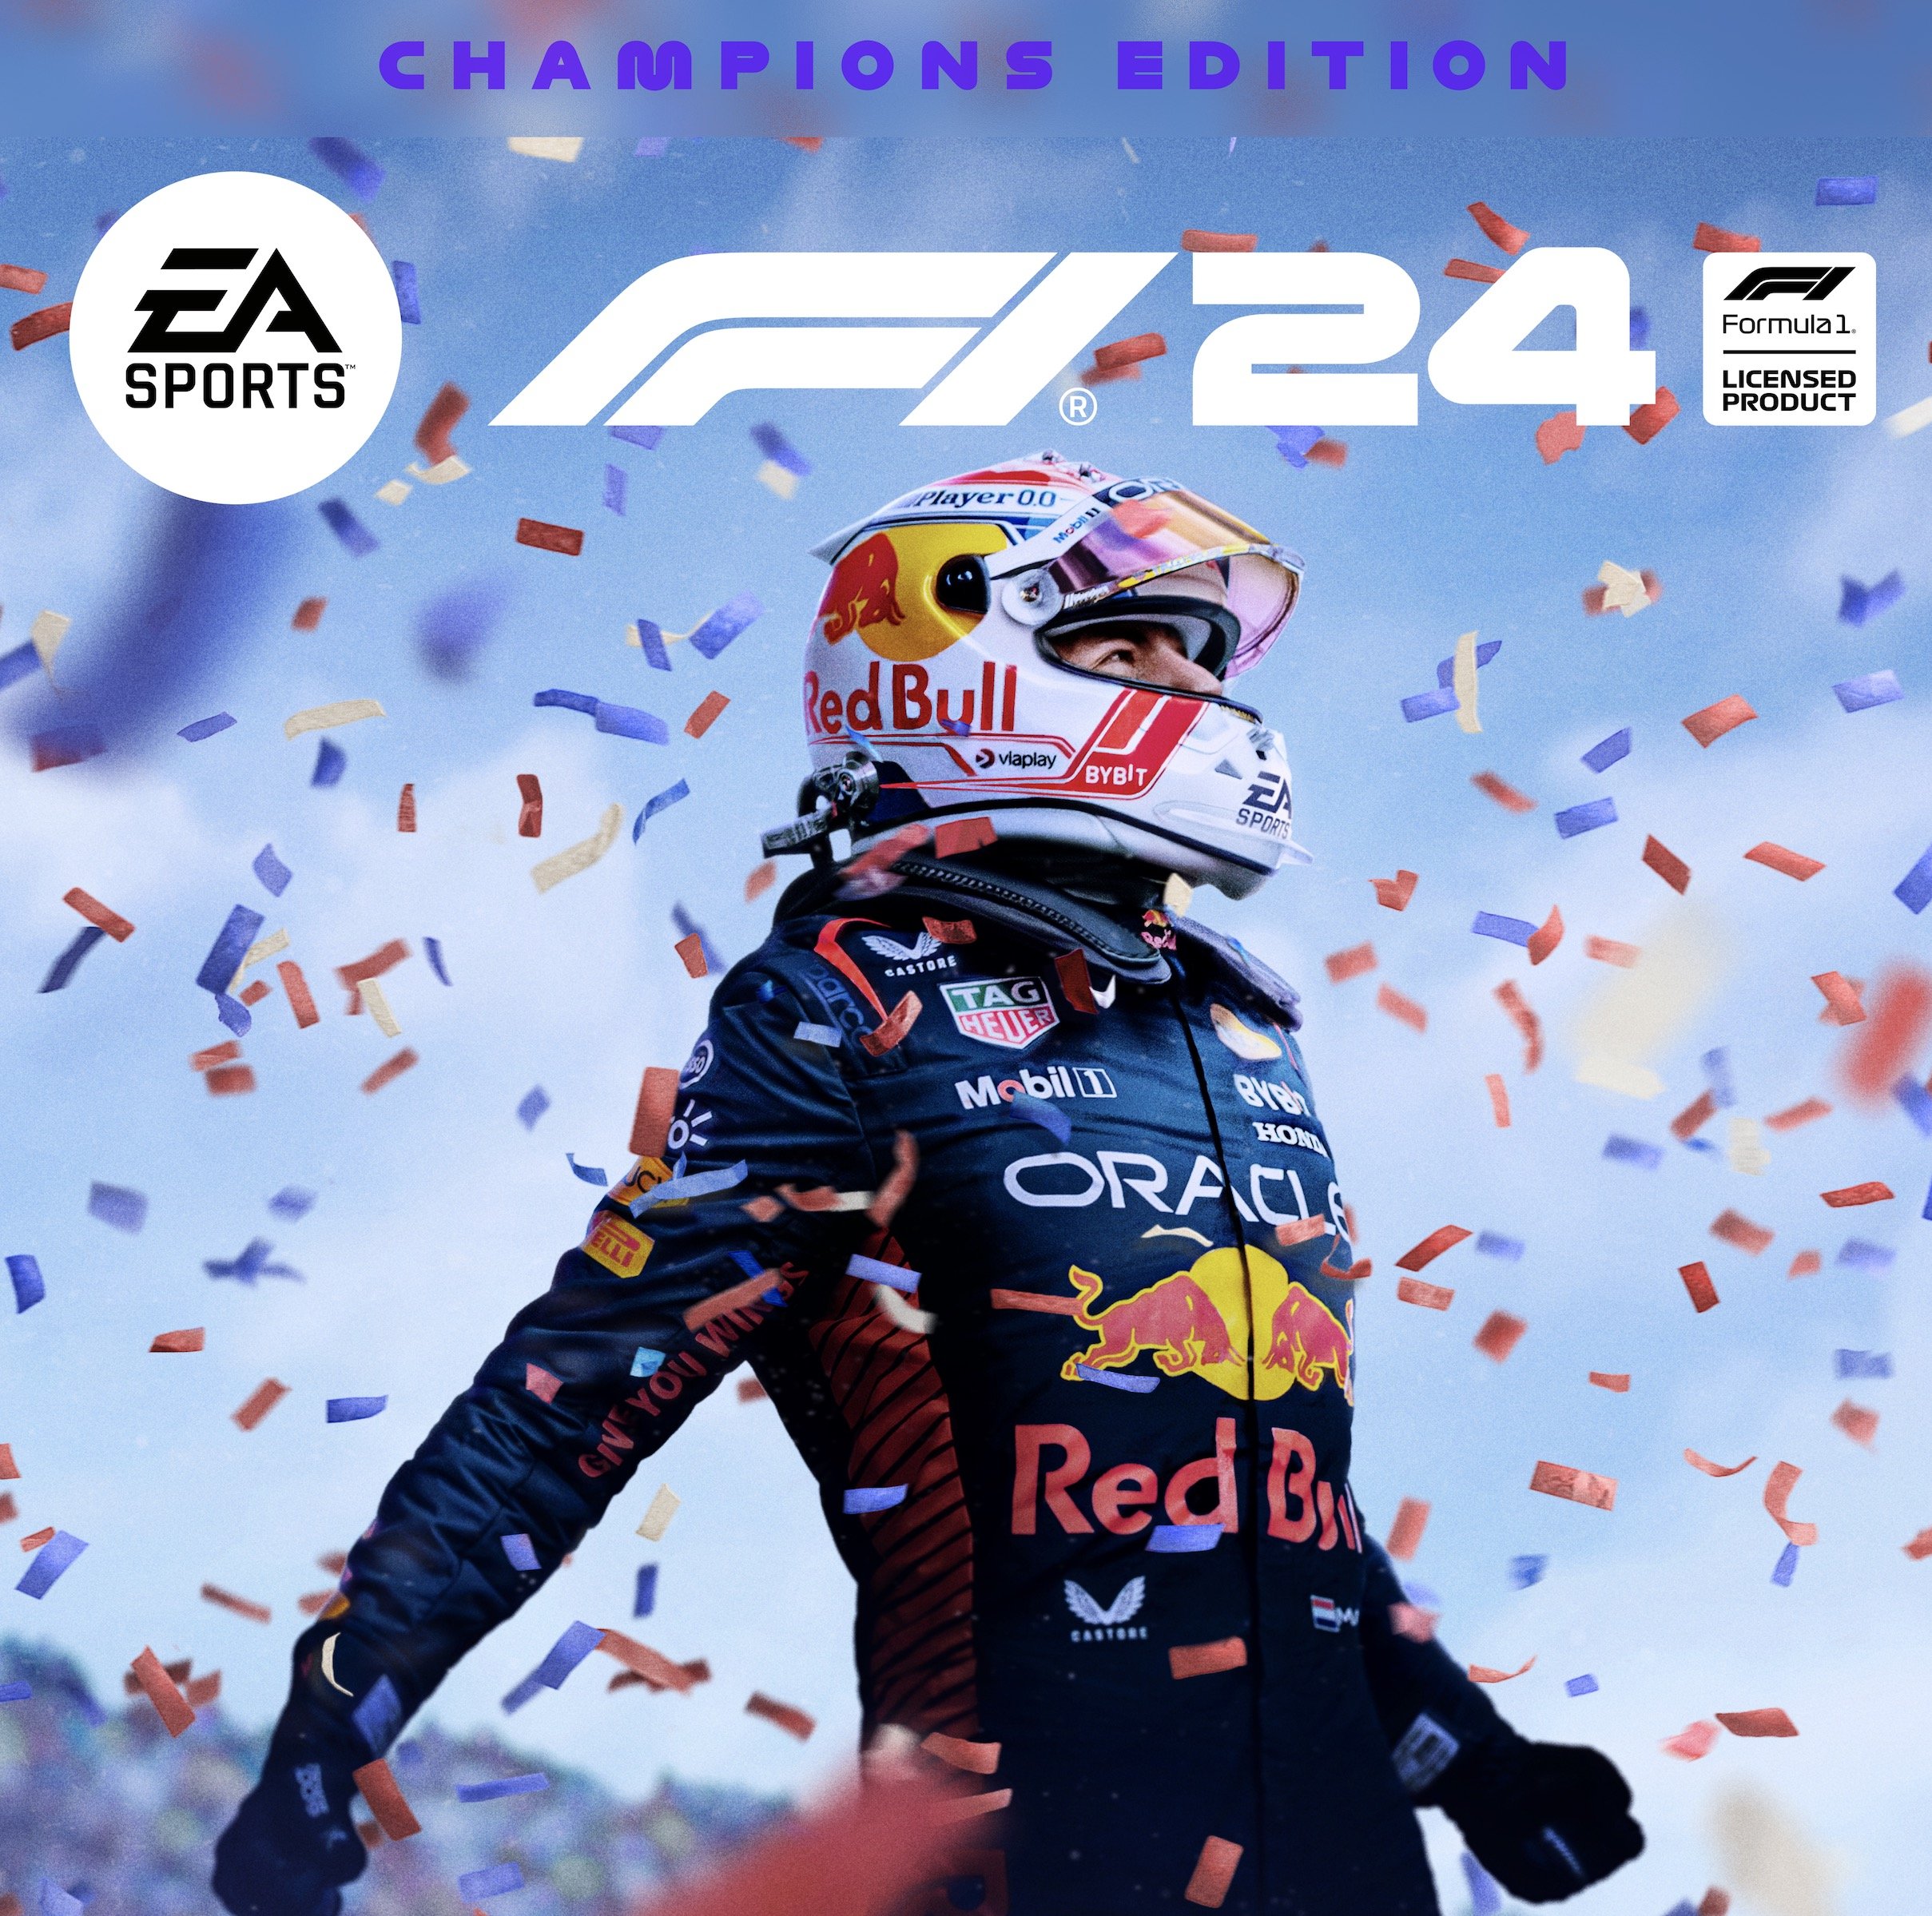 F1 24 dropping in the coming weeks as EA Sports reveals the cover stars Max Verstappen, Lewis Hamilton, Charles Leclerc and Lando Norris for your pre-drop excitement.  .jpg